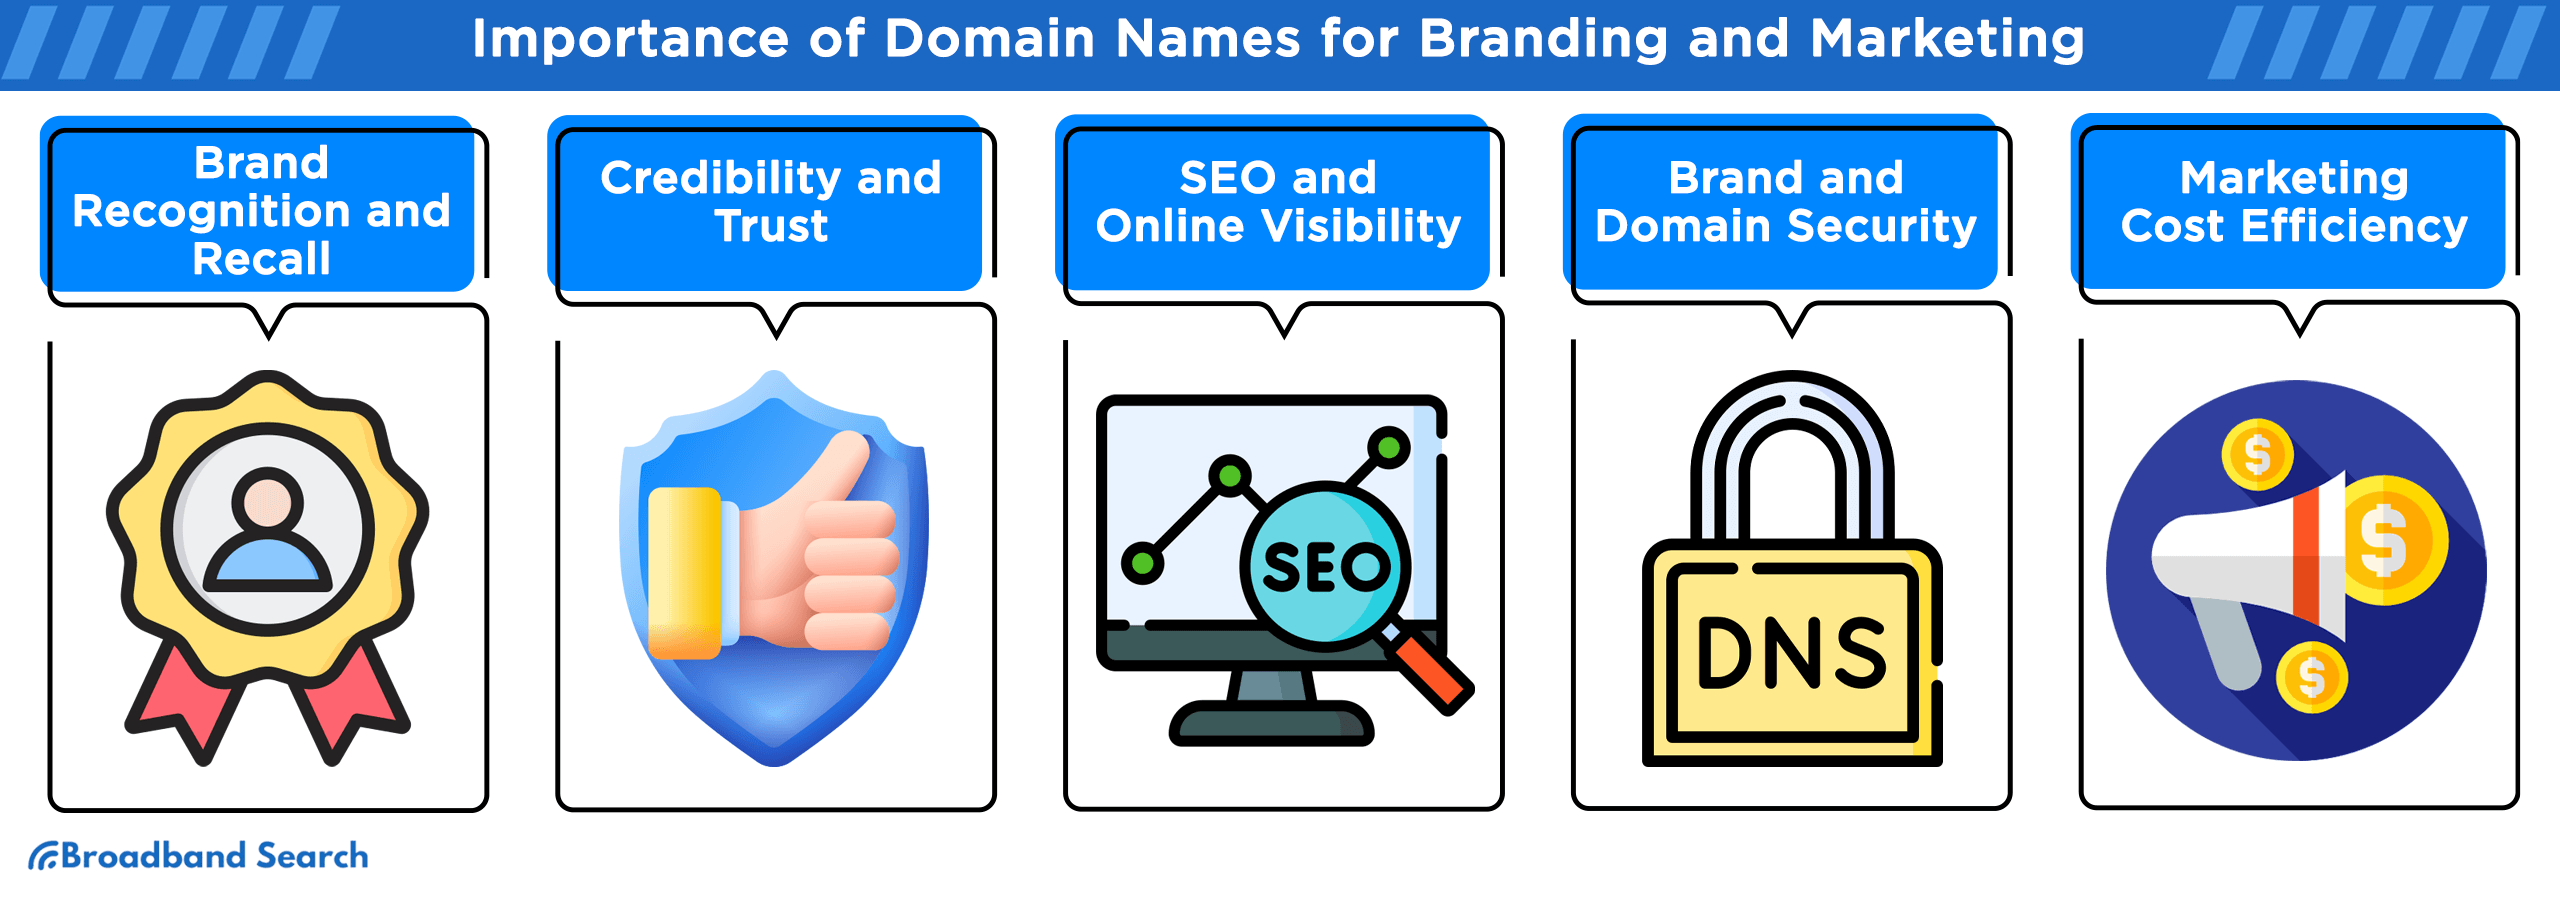 Importance of domain names for branding and marketing